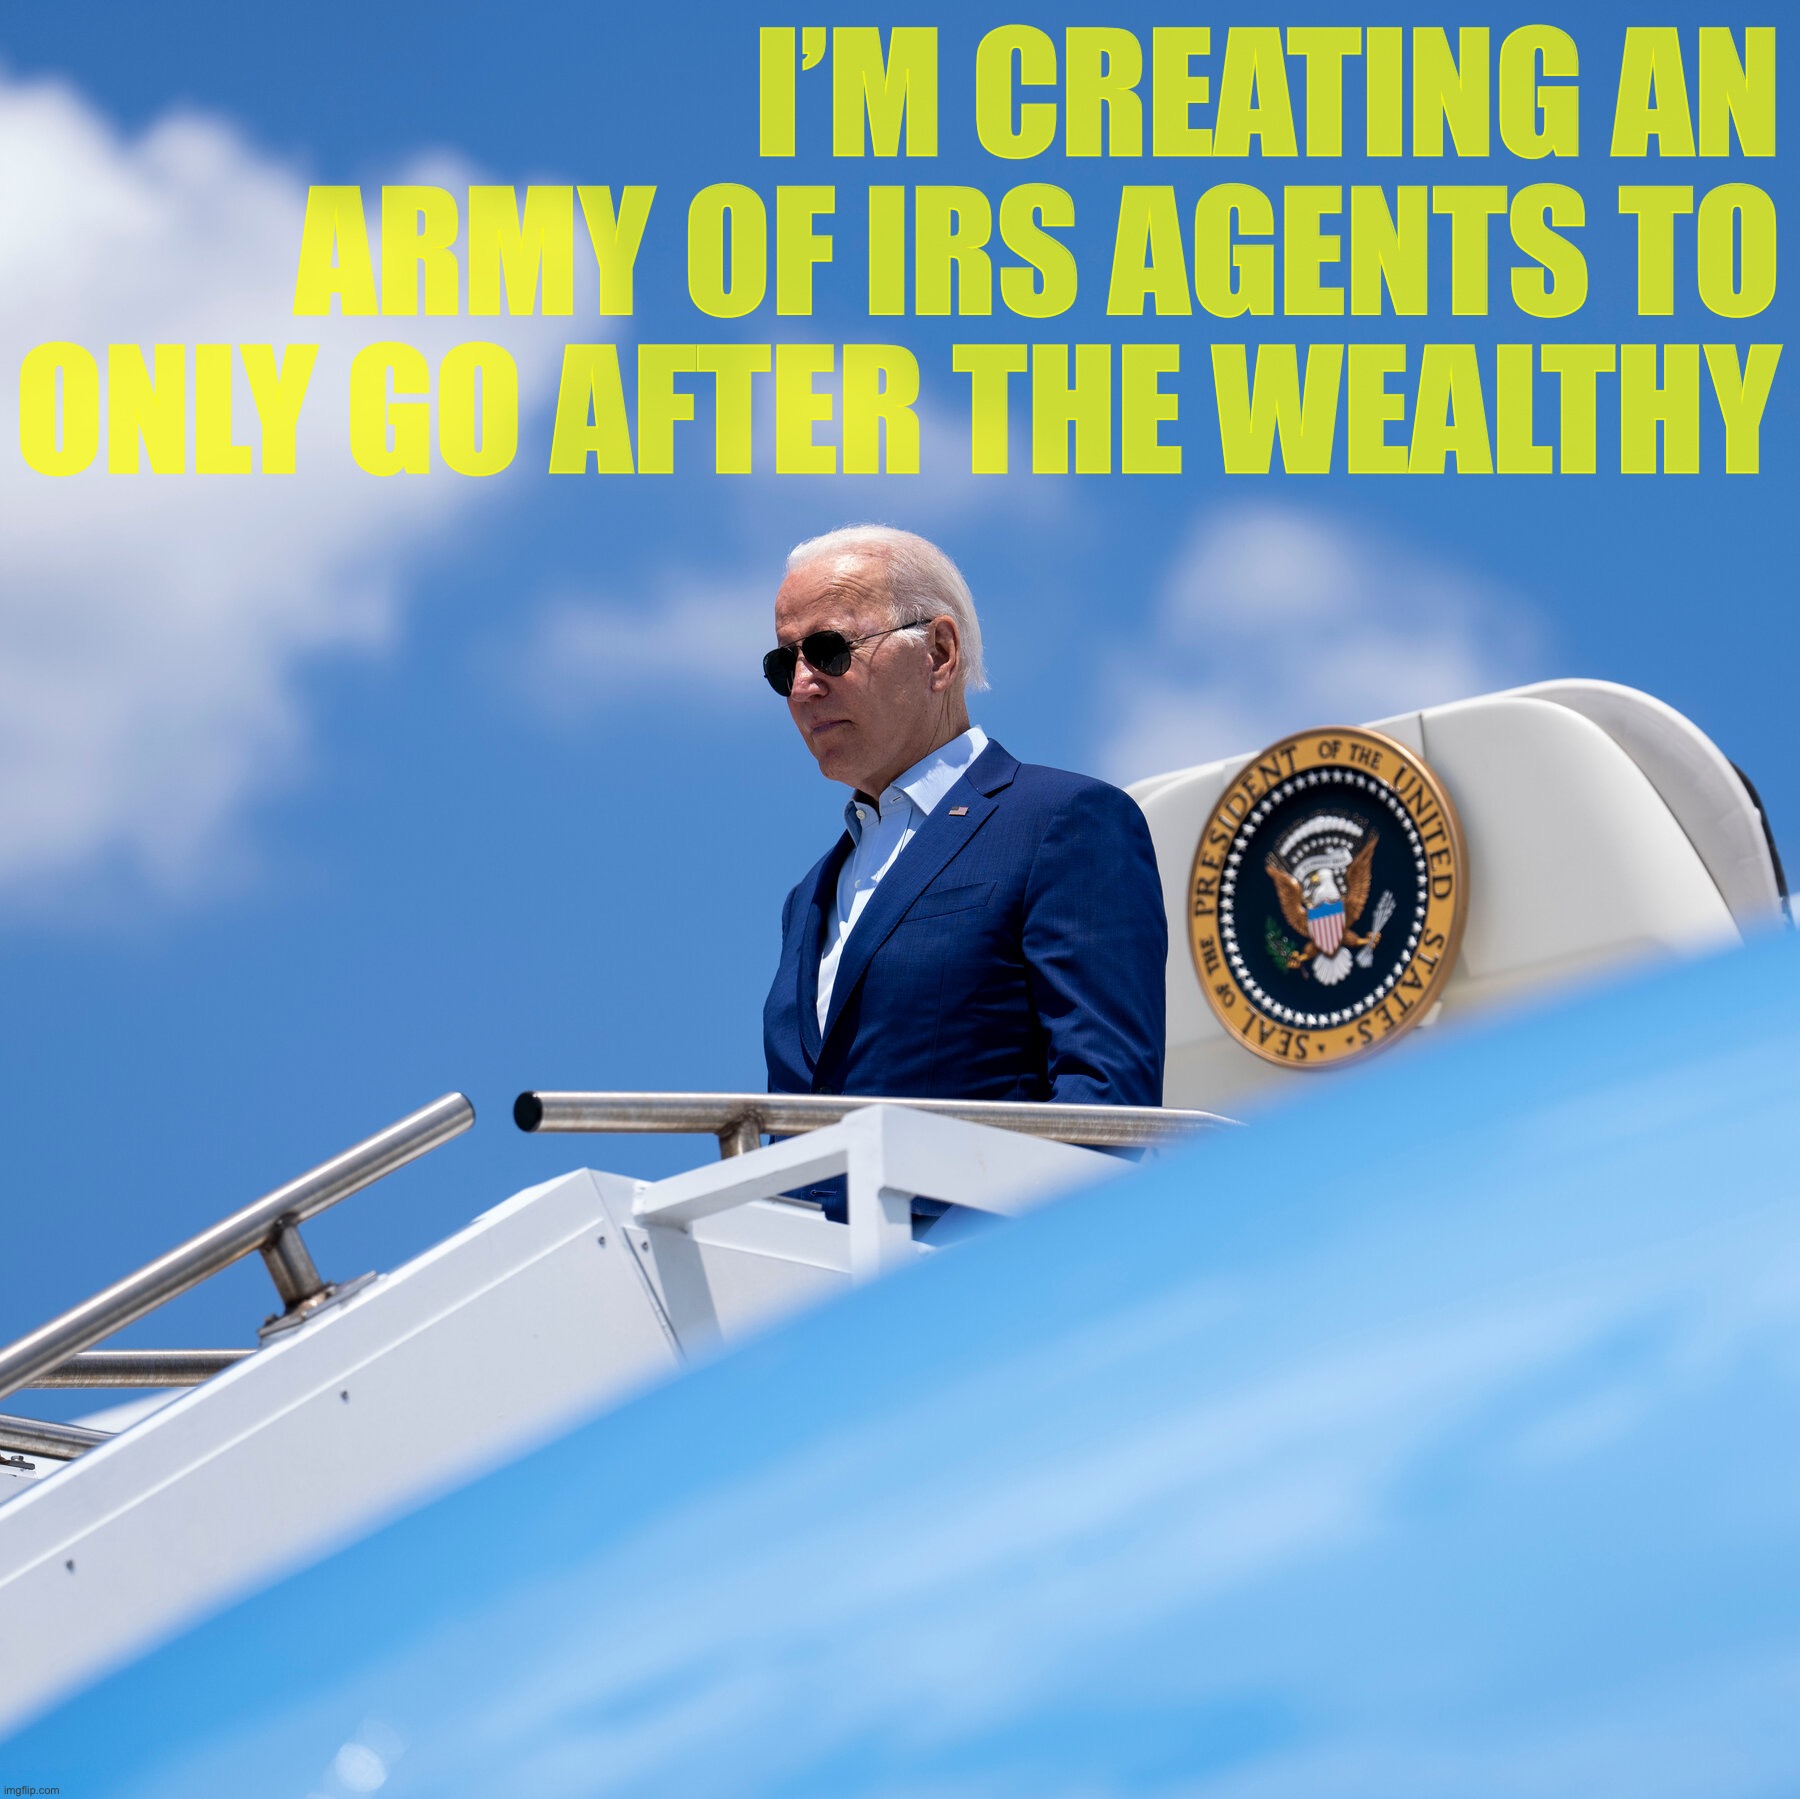 President Joe Biden on Air Force One | I’M CREATING AN ARMY OF IRS AGENTS TO ONLY GO AFTER THE WEALTHY | image tagged in president joe biden on air force one | made w/ Imgflip meme maker